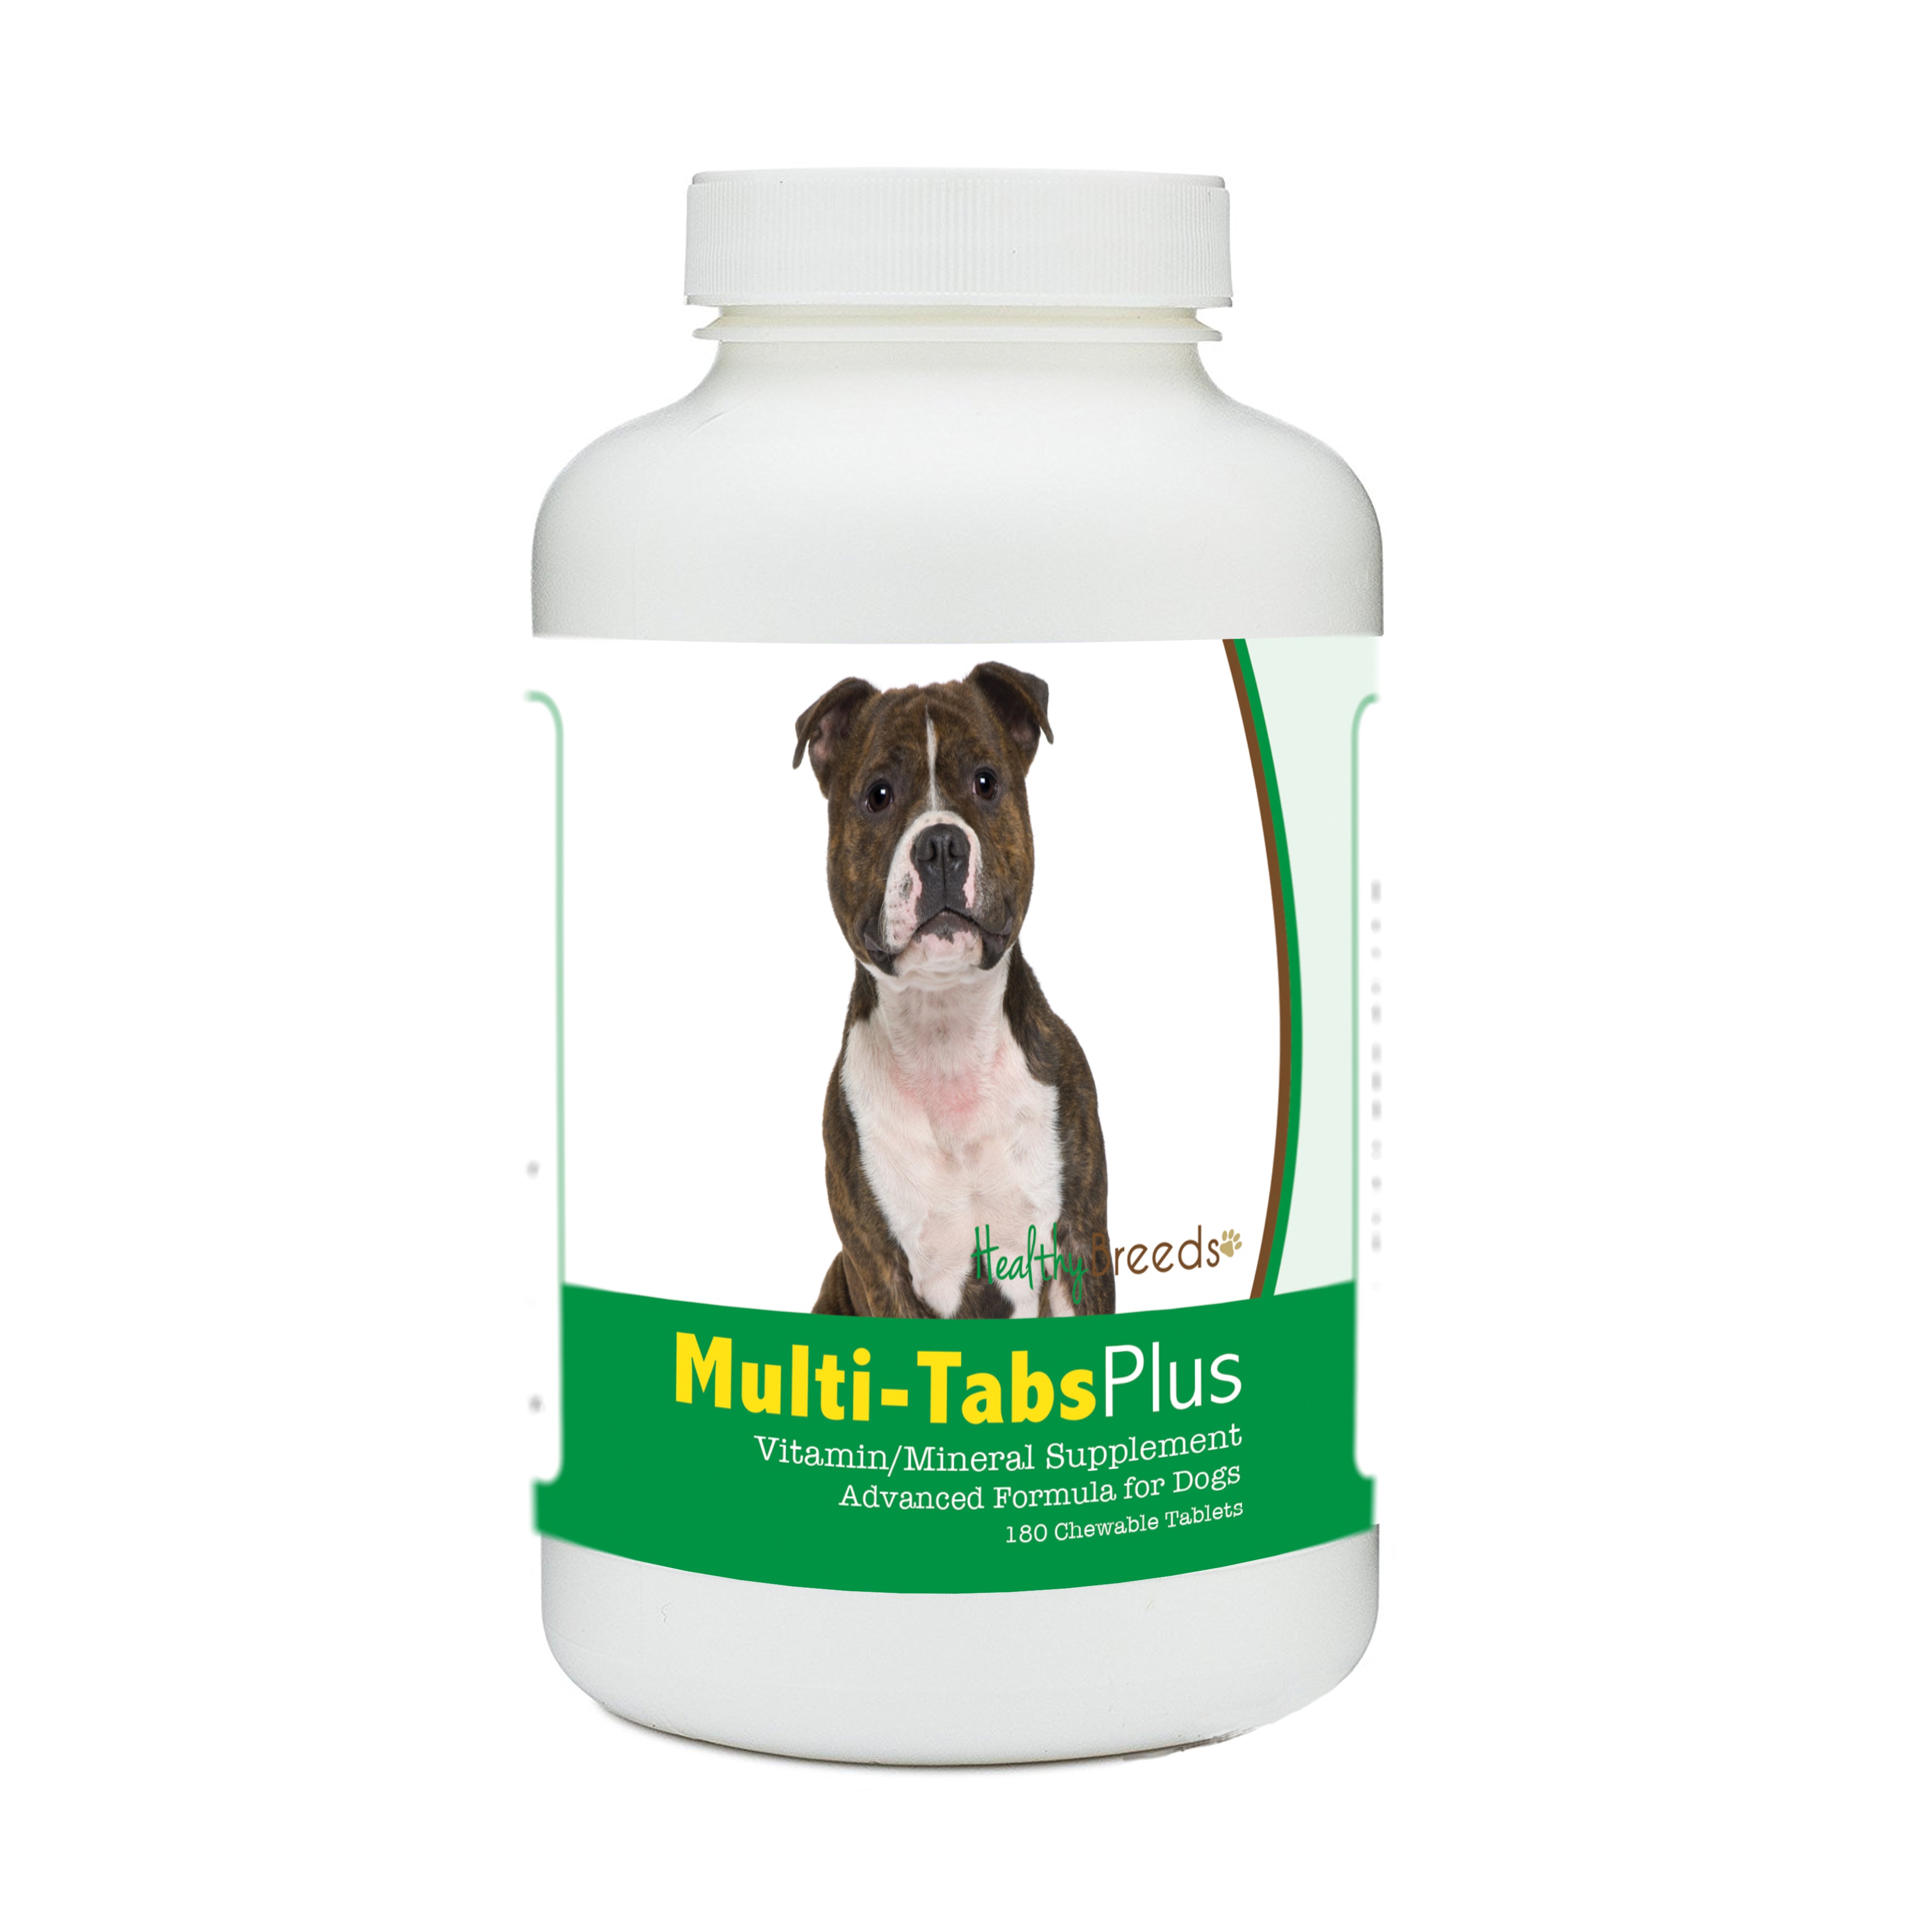 Staffordshire Bull Terrier Multi-Tabs Plus Chewable Tablets 180 Count